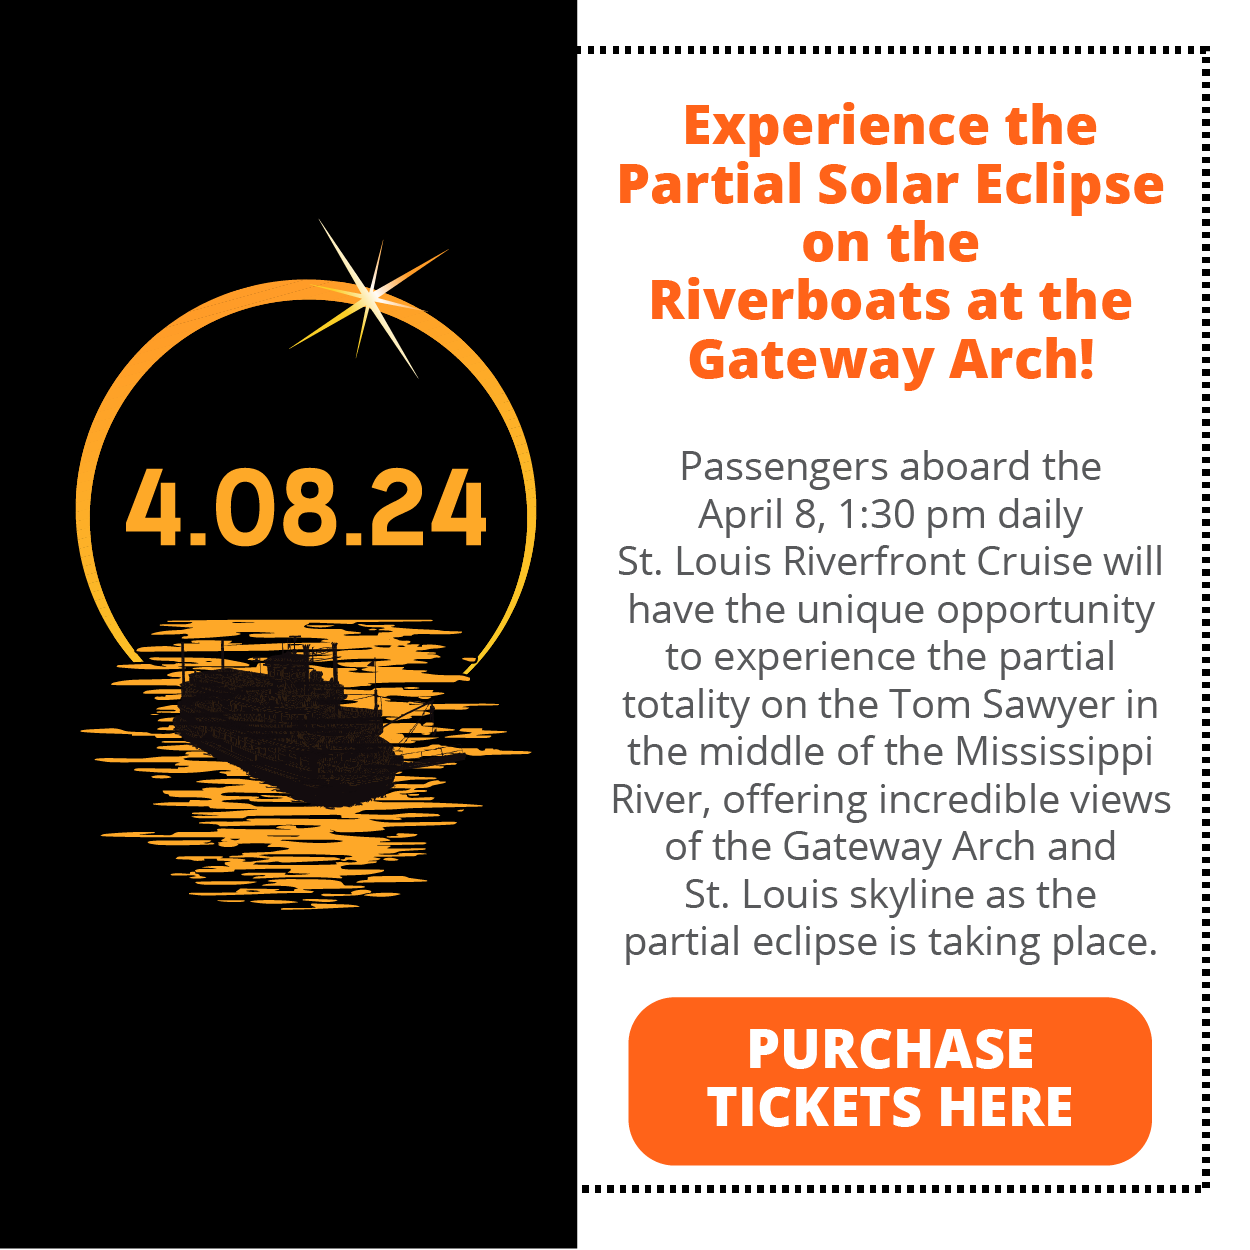 Left Side of image black background with a n image of a solar eclipse and a boat on the water. Right side of image has text which says the April 8, 2024 Riverfront Cruise at 1:30 pm will offer an opportunity to see the partial solar eclipse on the Mississippi River.